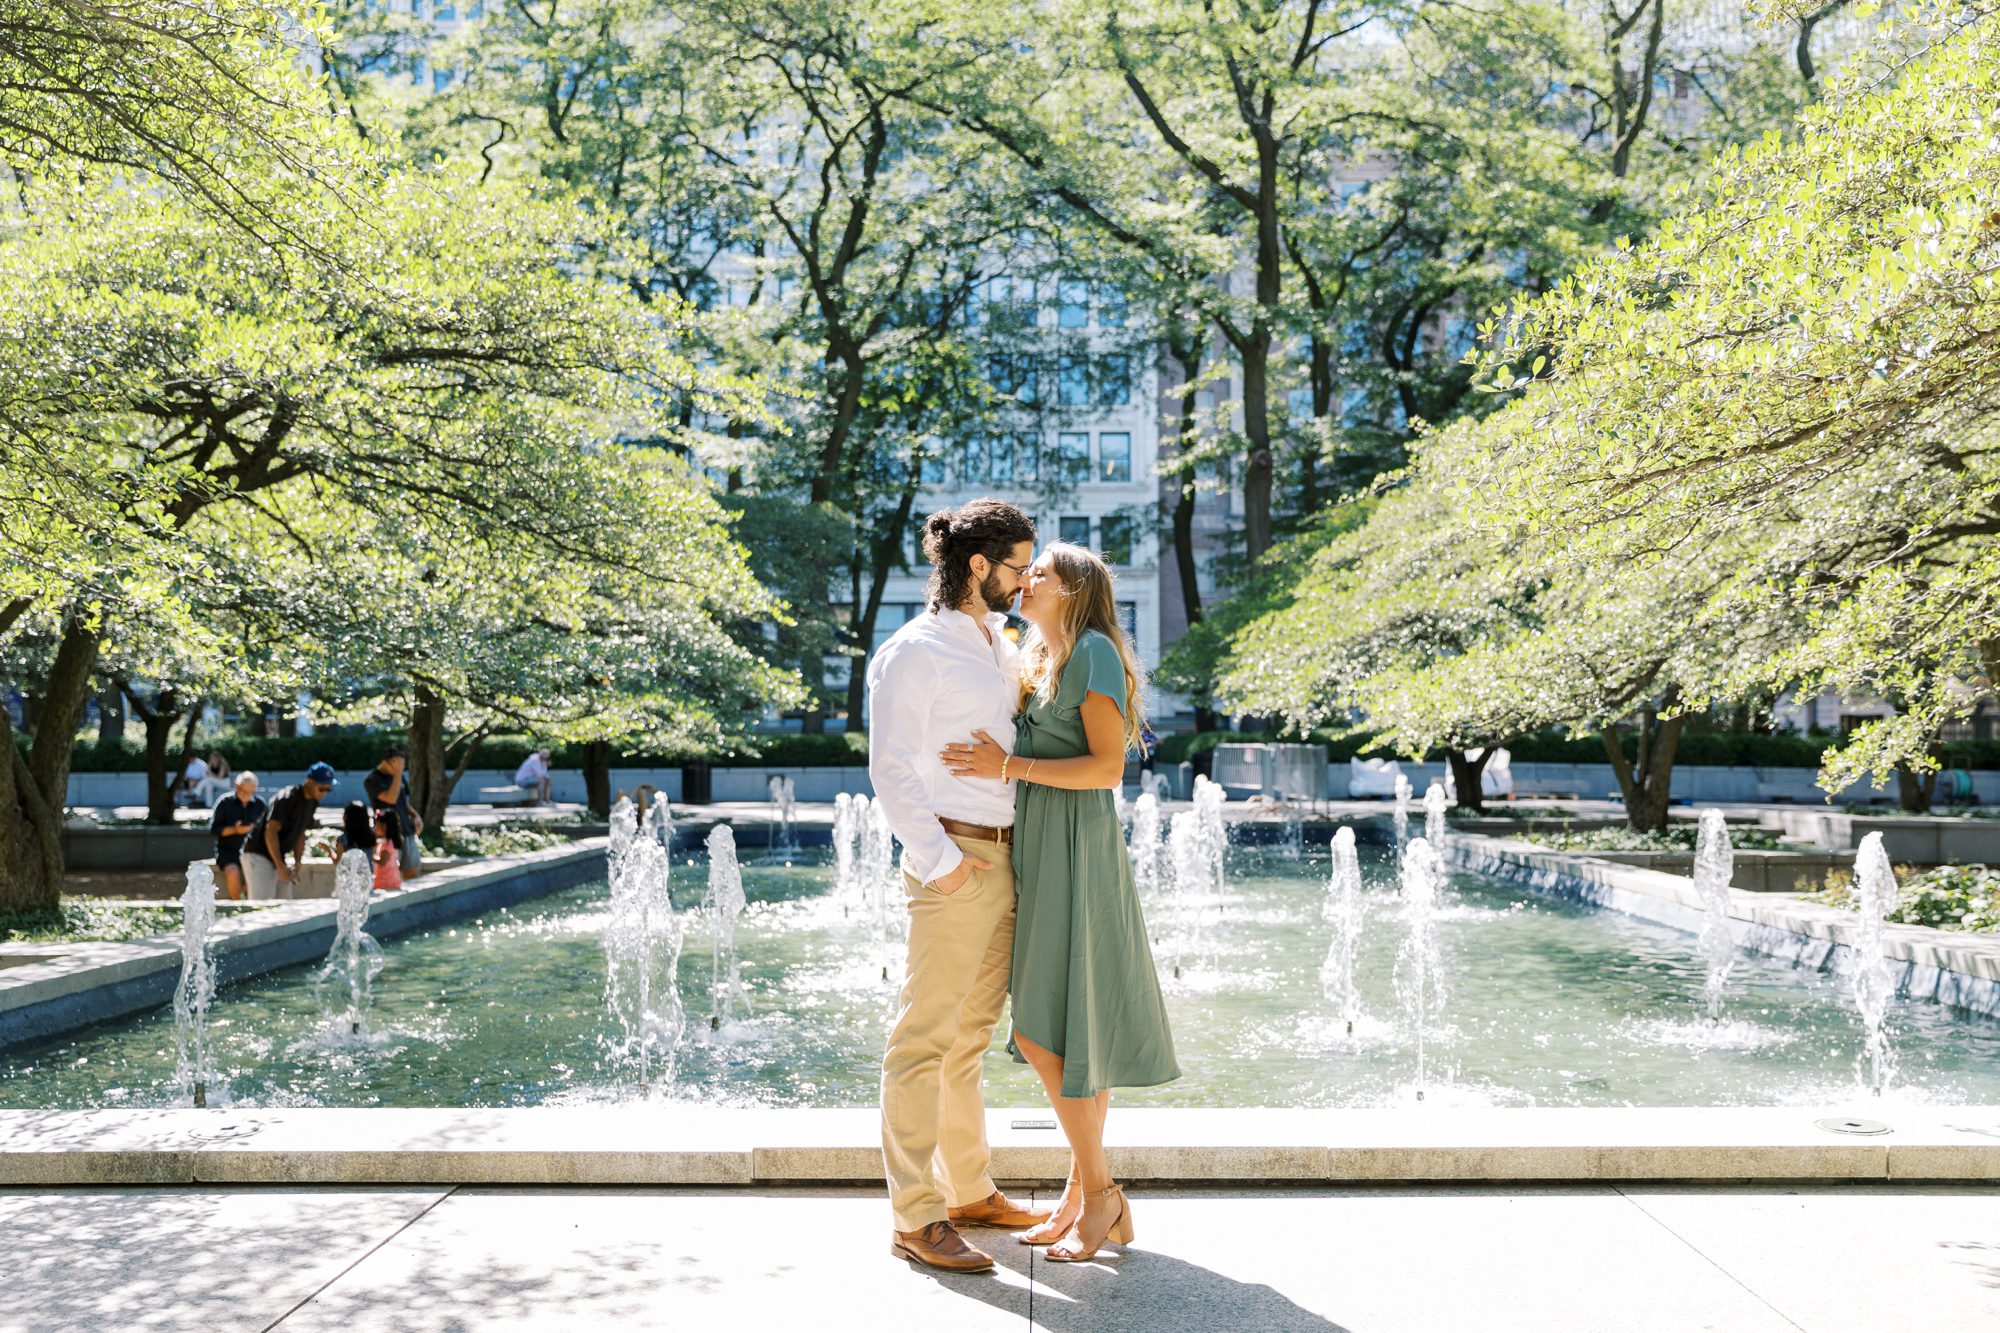 Man and woman kiss during their city engagement photoshoot